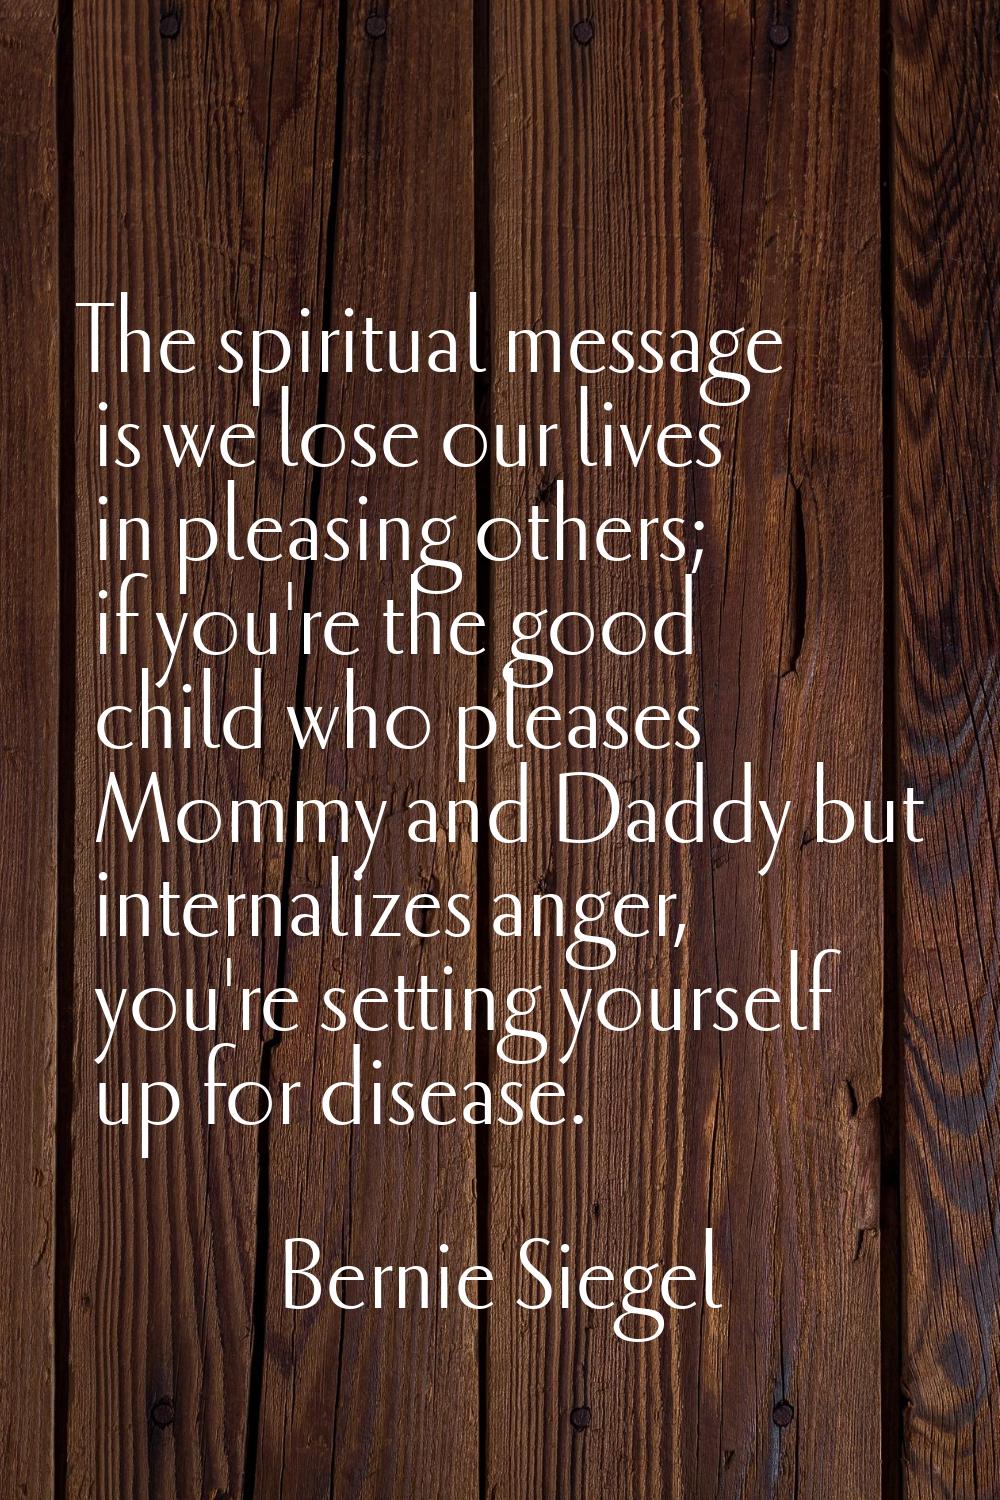 The spiritual message is we lose our lives in pleasing others; if you're the good child who pleases